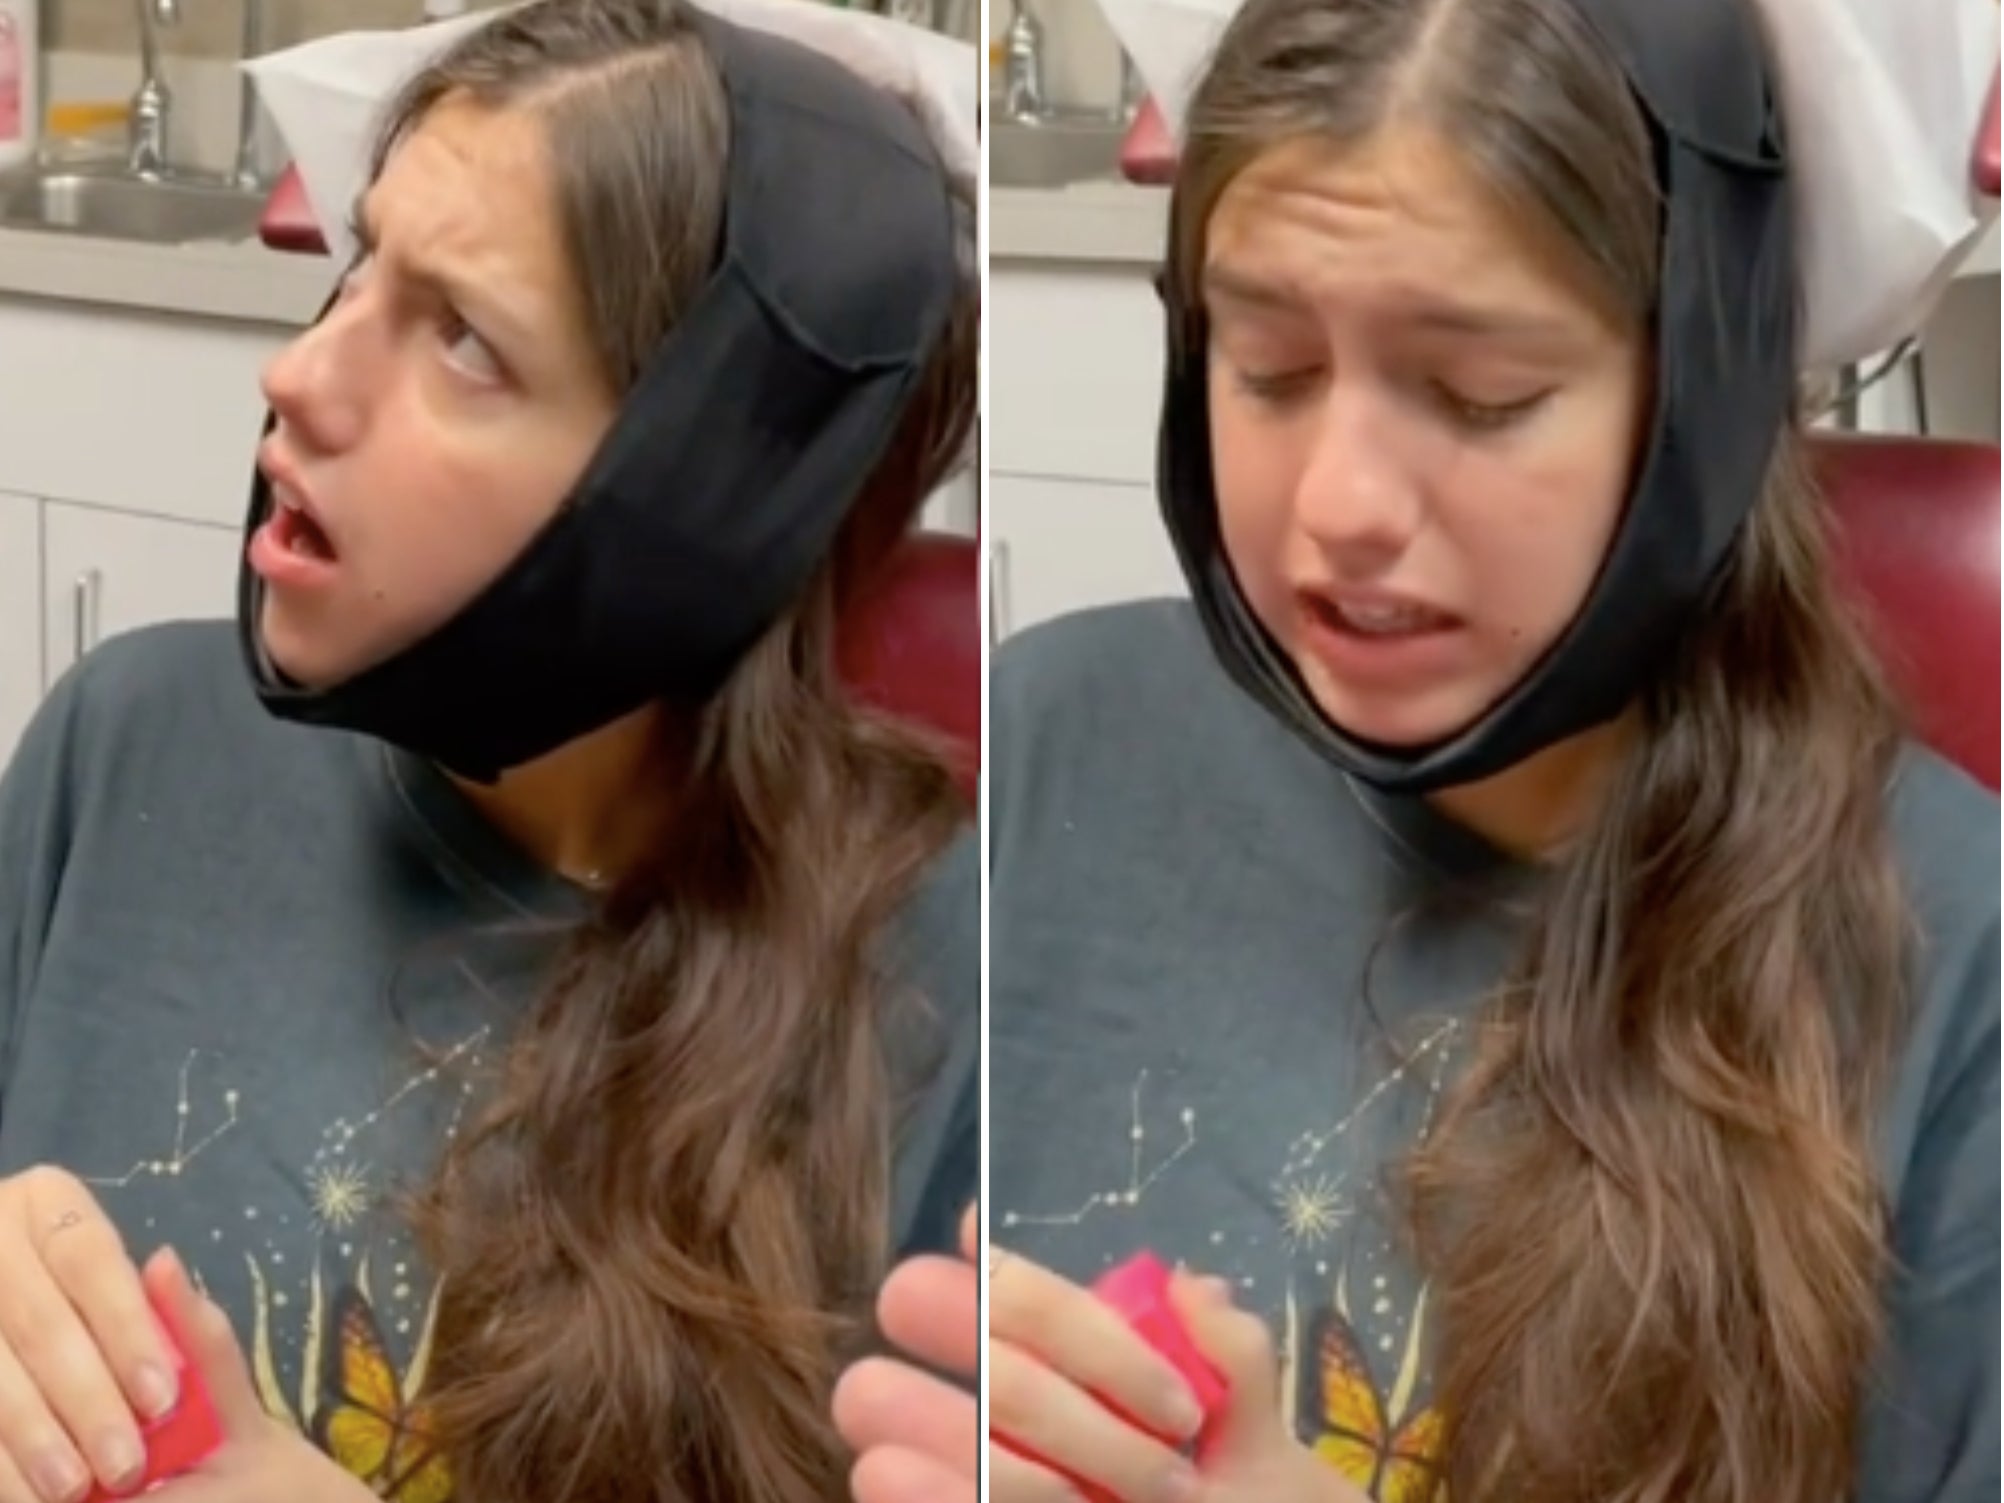 Woman’s hilarious reaction goes viral on TikTok after her surgeon reveals he doesn’t like Taylor Swift